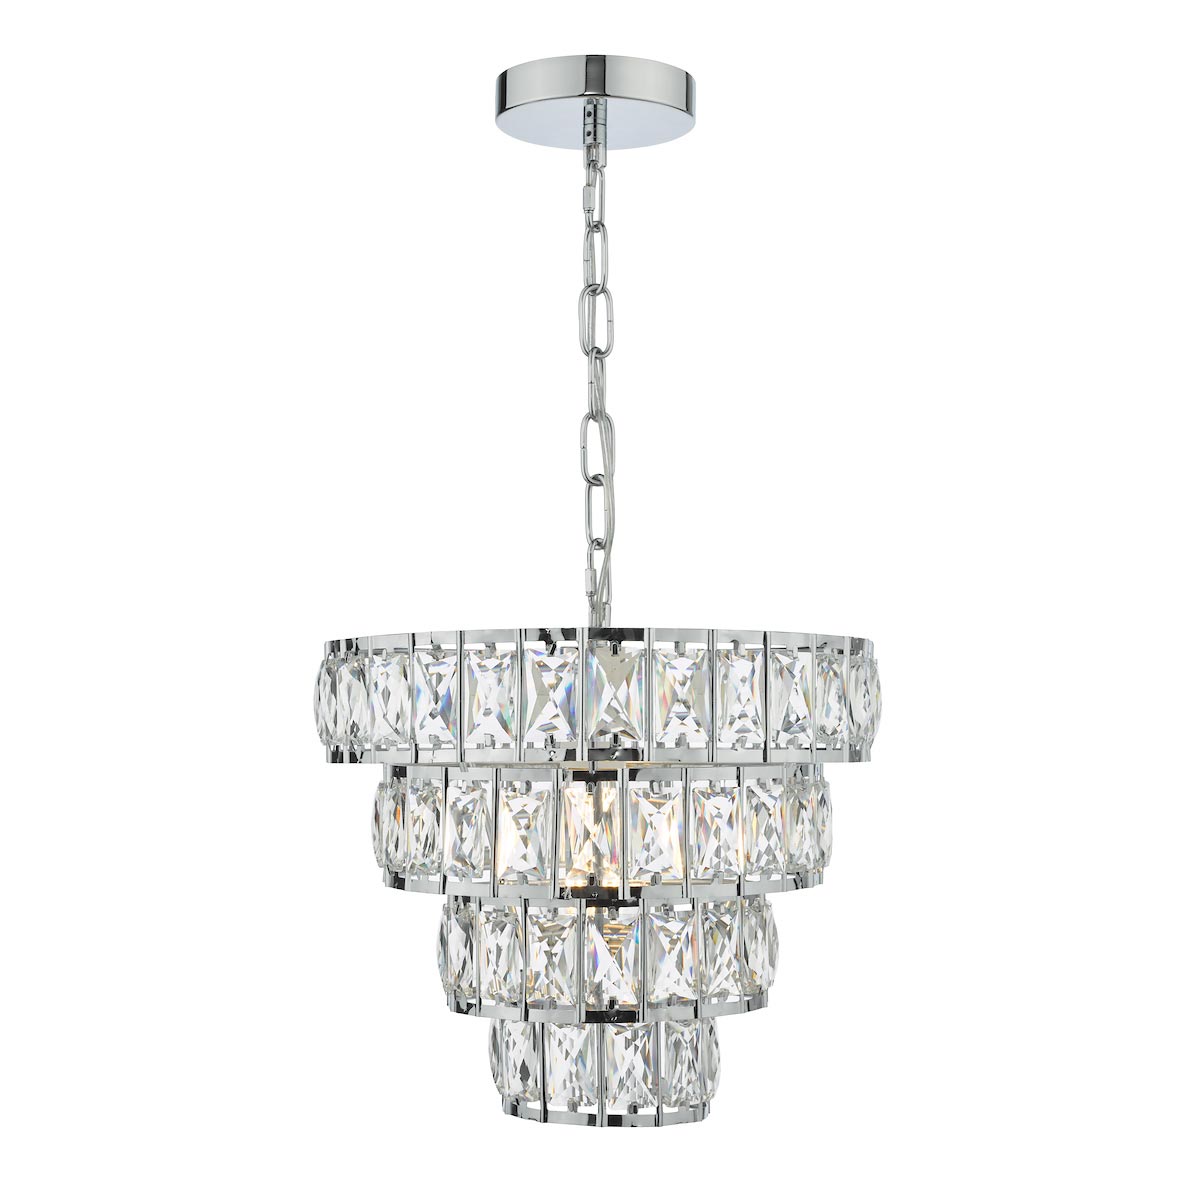 Dar Cerys Small 1 Light Tiered Crystal Ceiling Pendant Polished Chrome